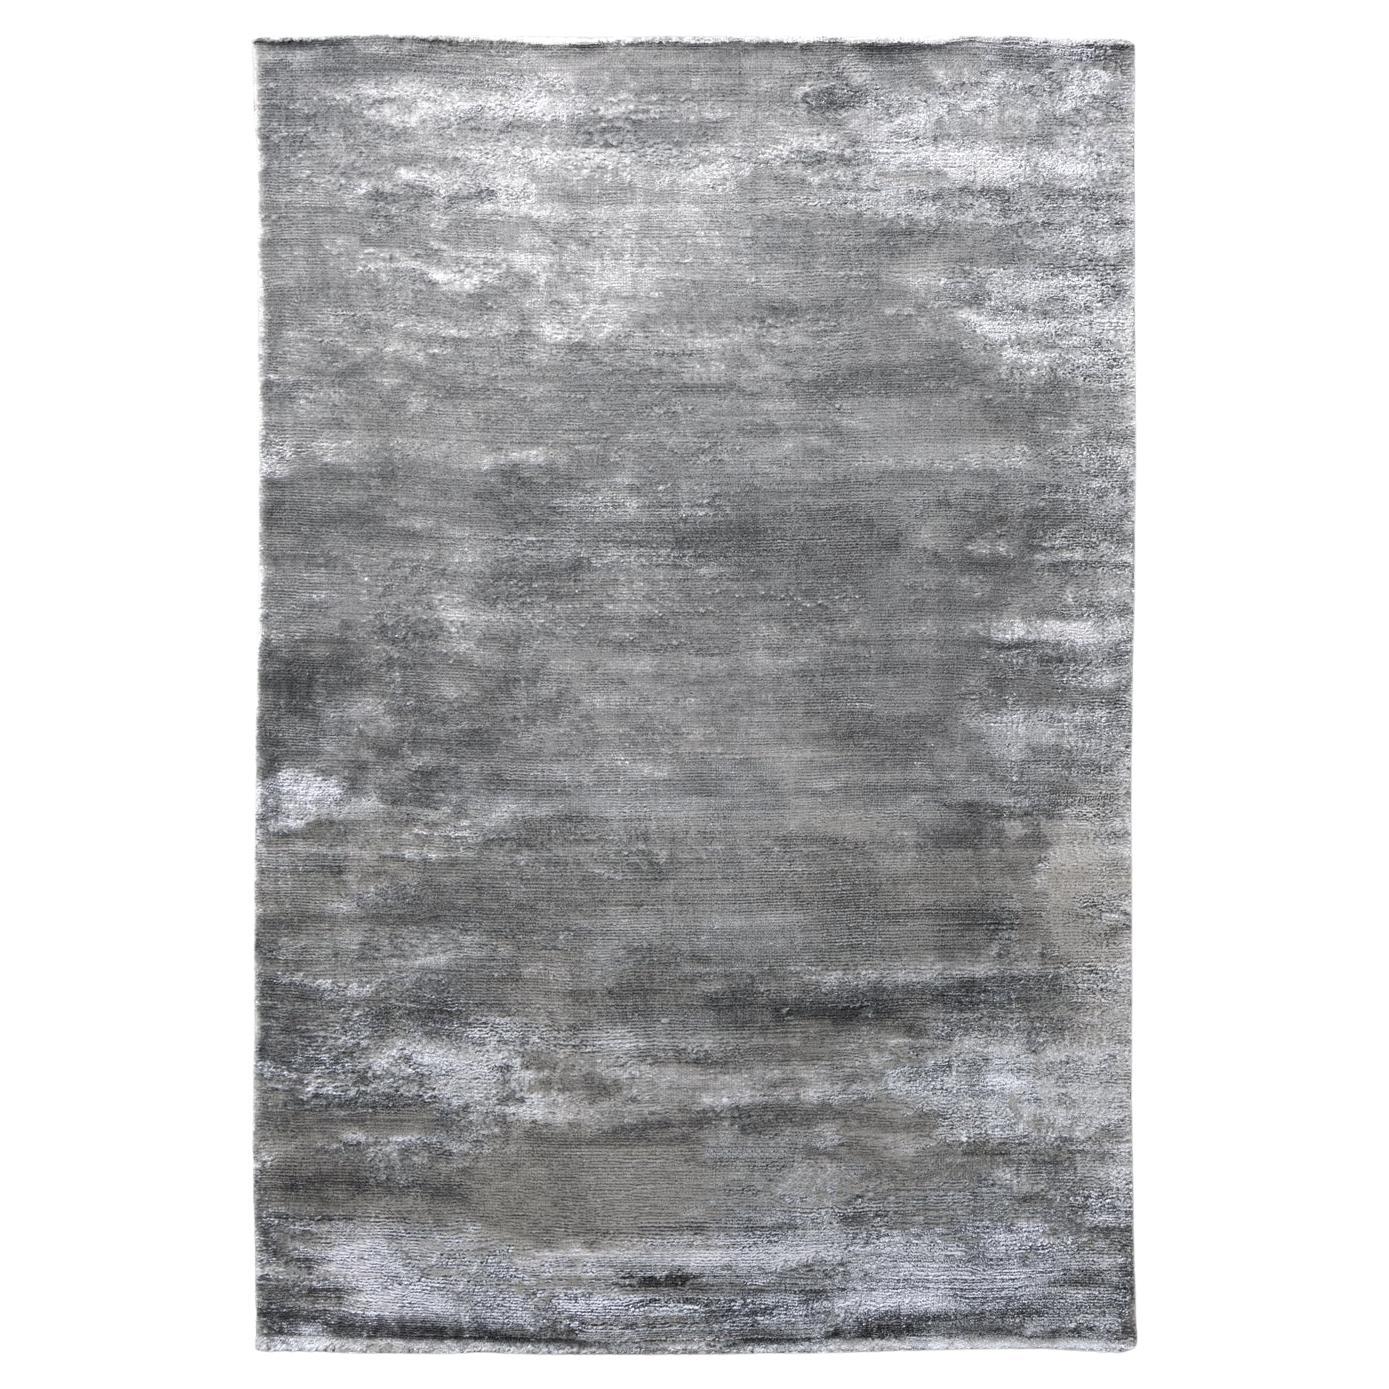 Contemporary Luxury Shiny Velvety Silvery Rug by Deanna Comellini 170x240 cm For Sale